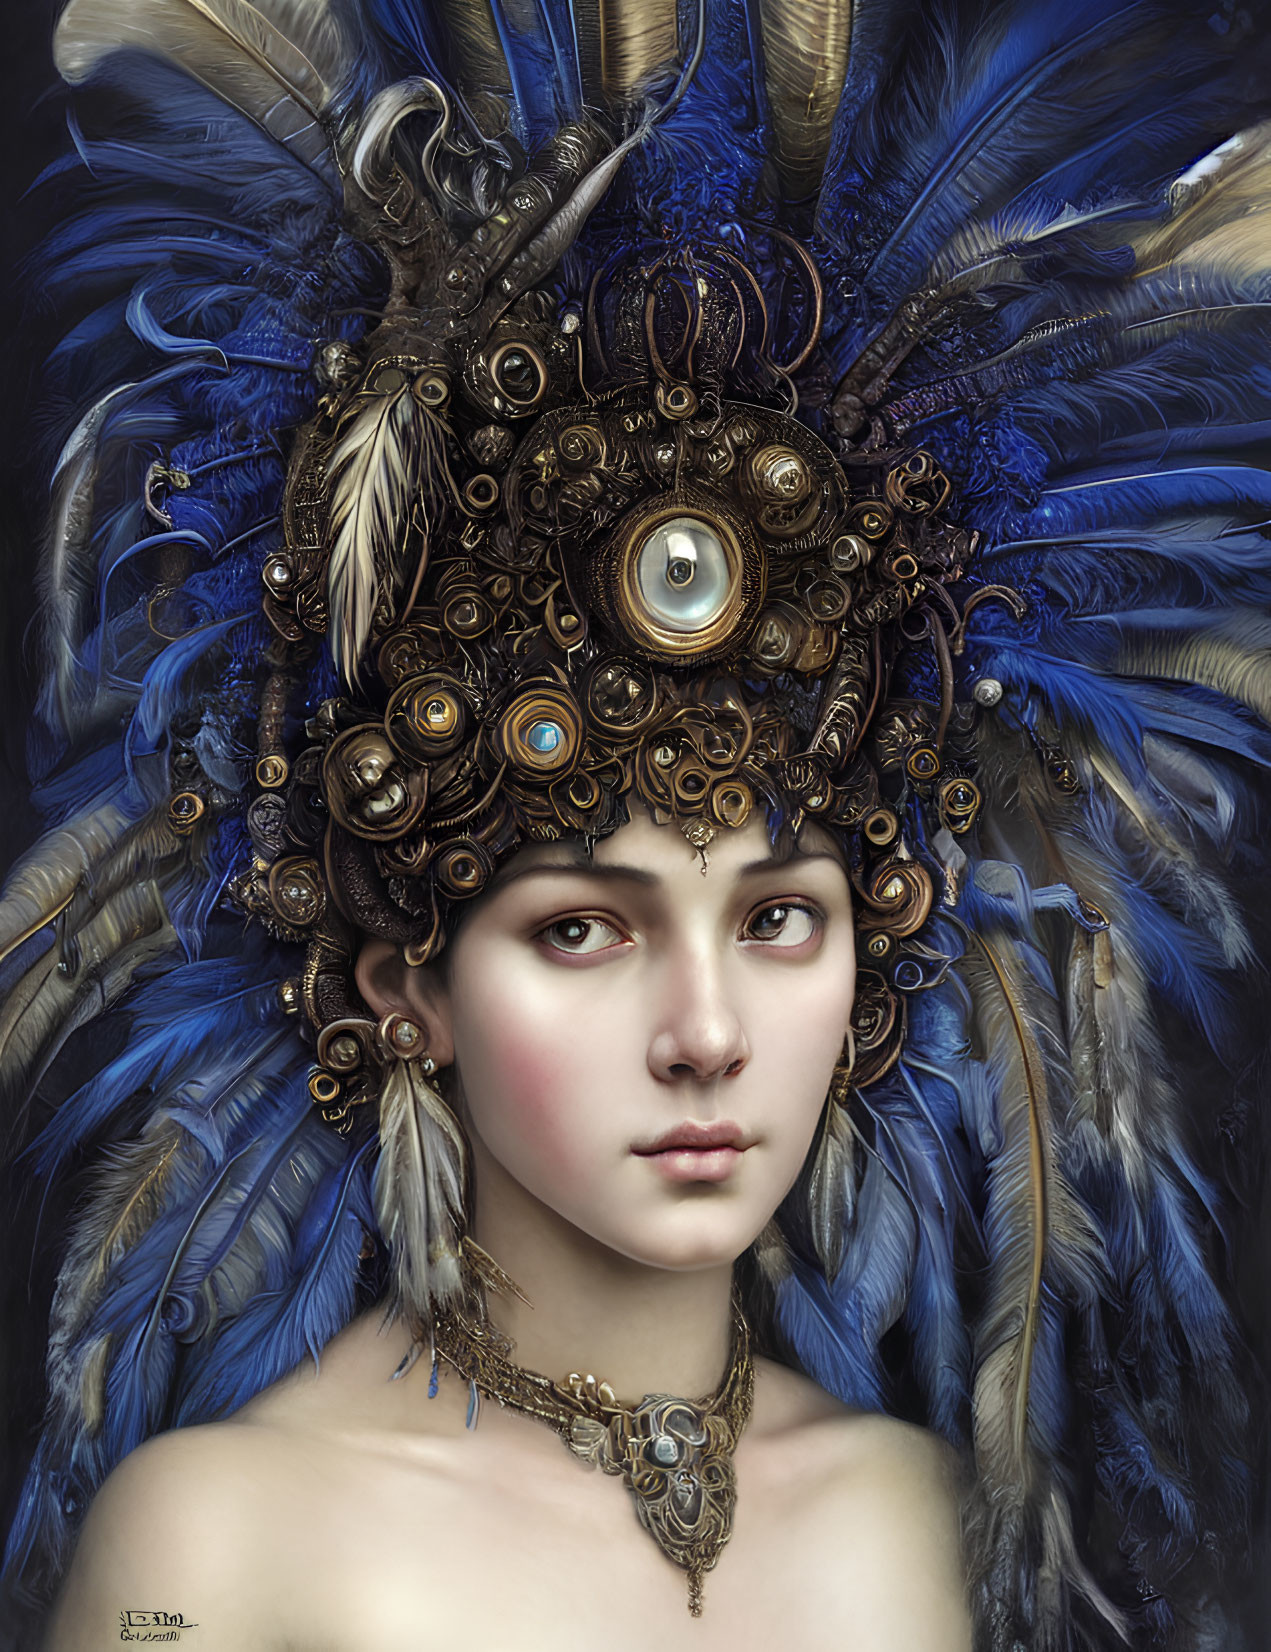 Portrait of a person with ornate steampunk headpiece featuring feathers, gears, and eyes